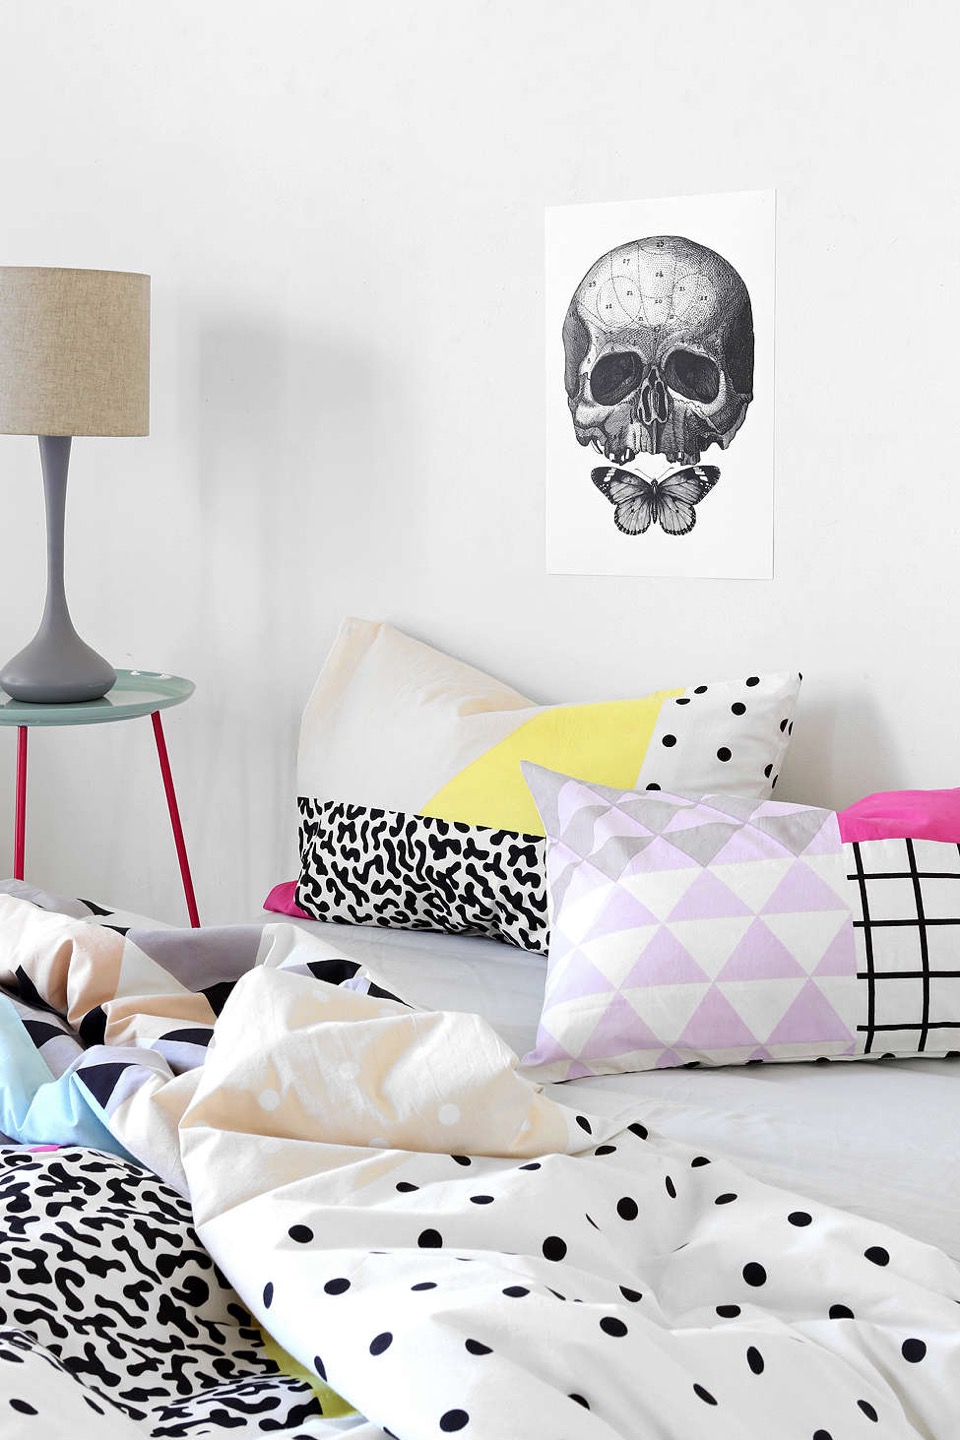 Assembly Home Pattern block pillow cases and duvet cover from Urban Outfitters